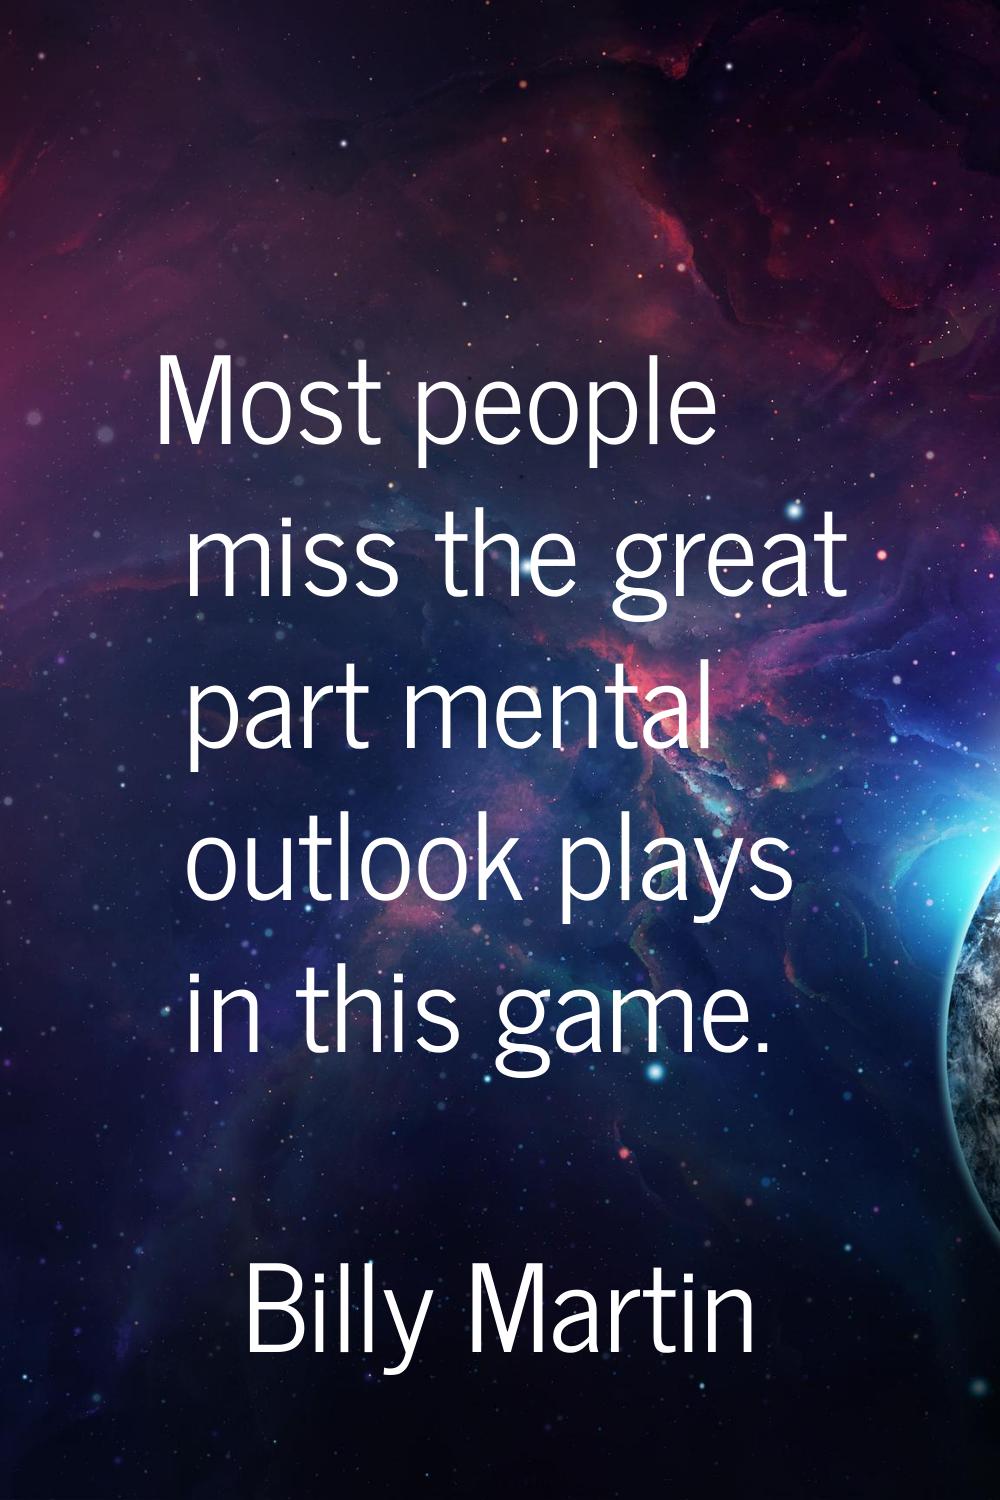 Most people miss the great part mental outlook plays in this game.